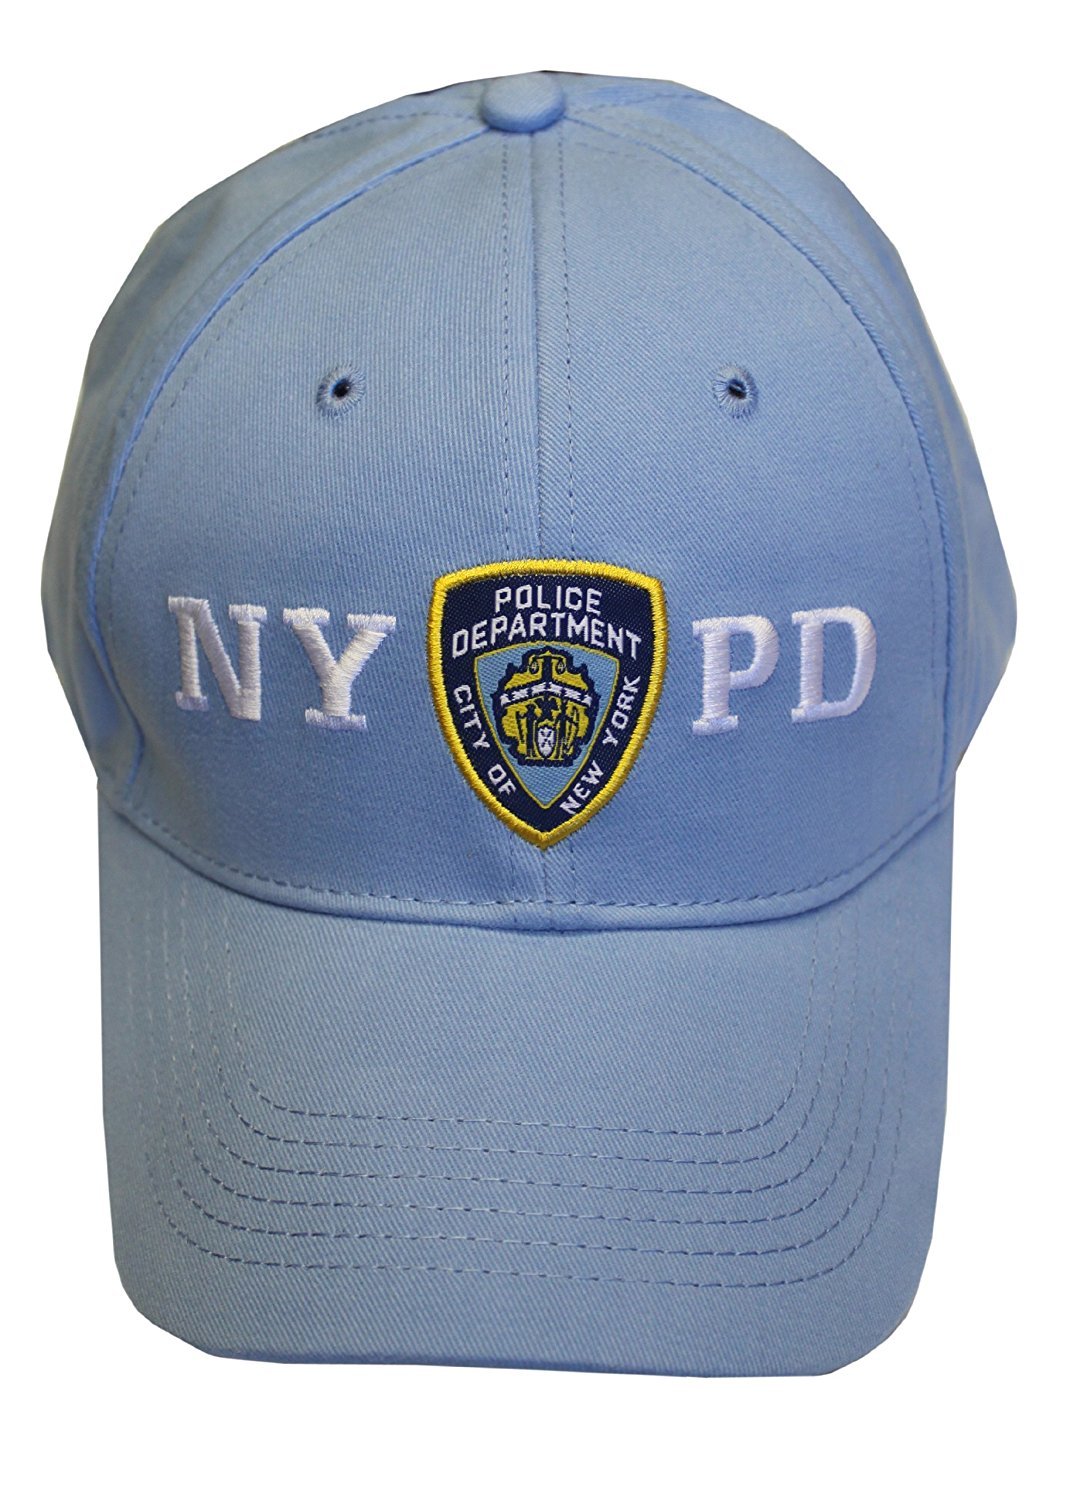 NYPD Baseball Hat New York Police Department Light Blue & White One Size